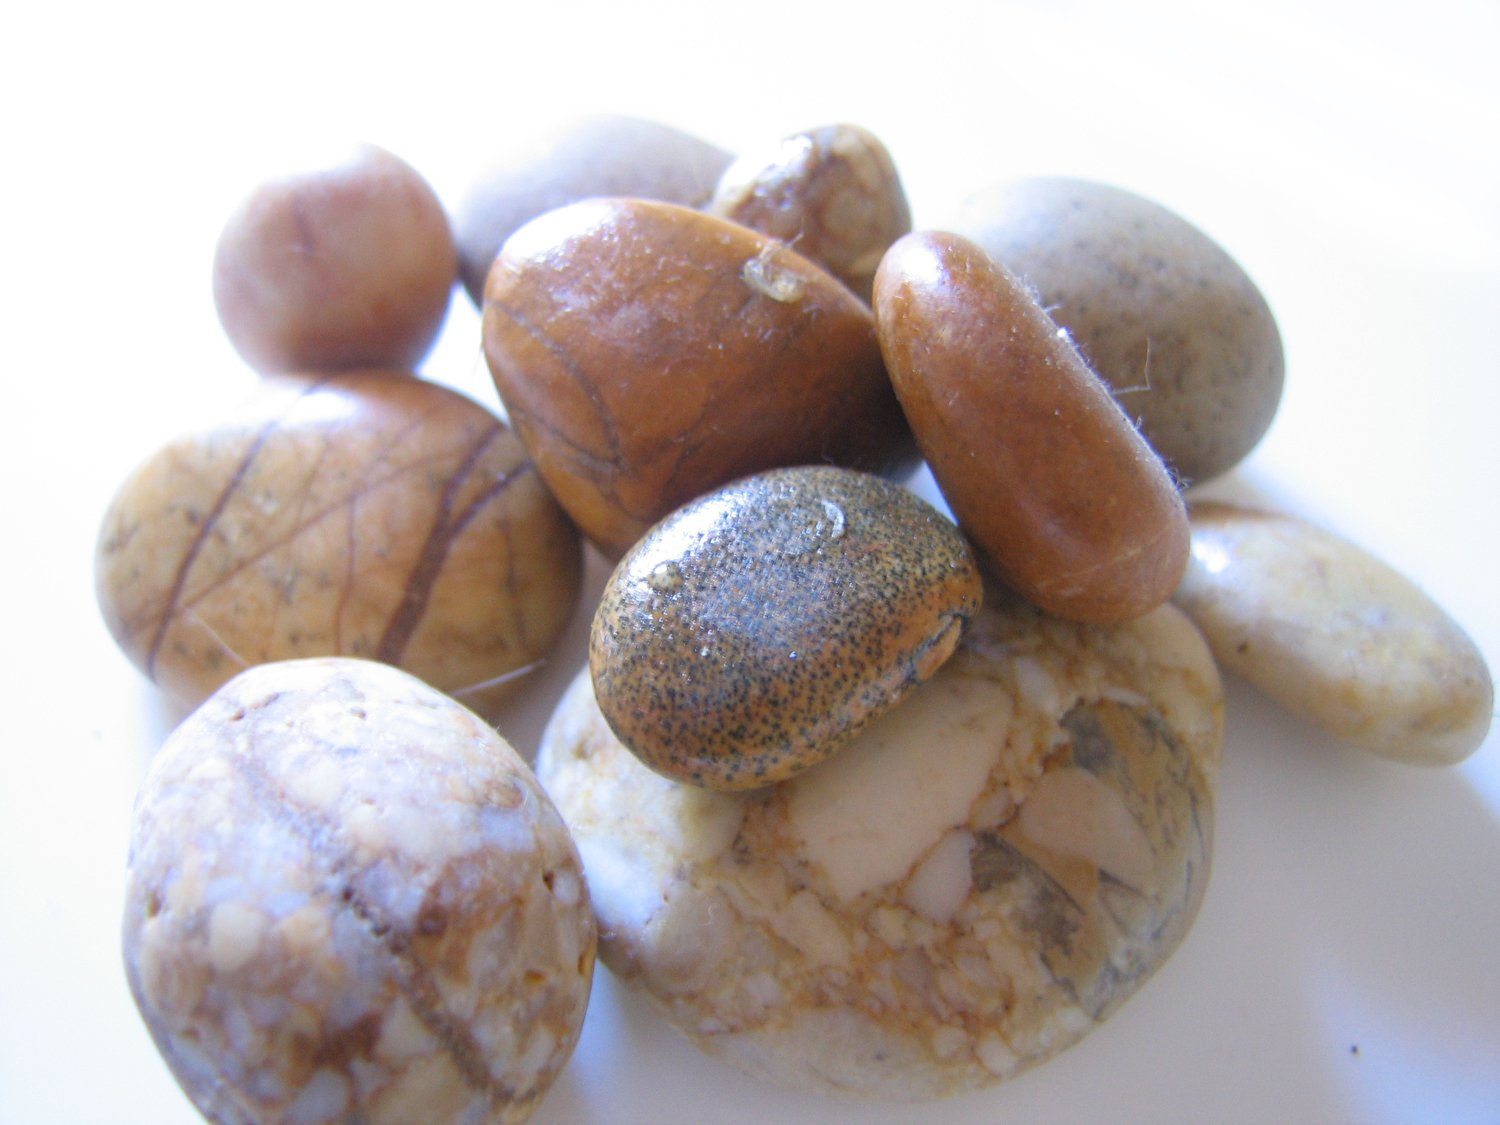 several different stones sitting together on top of each other